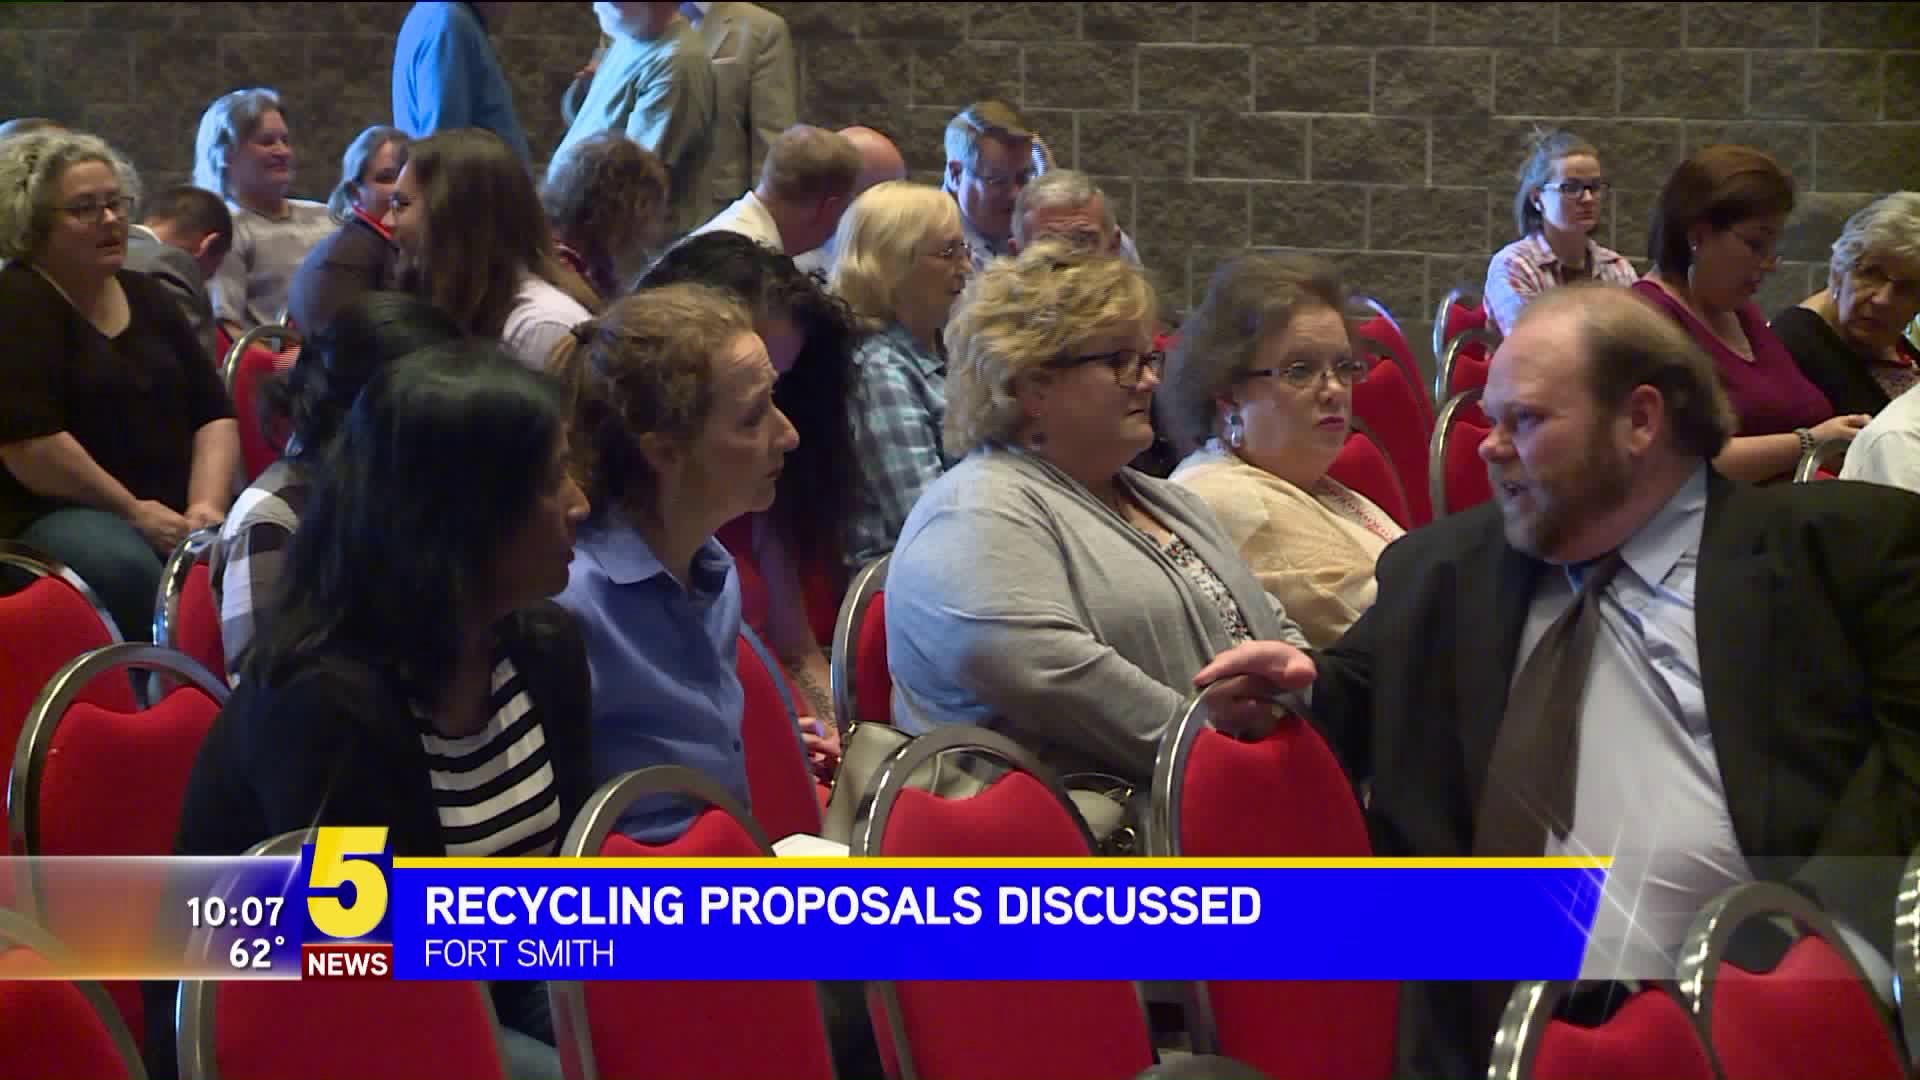 Recycling Proposals Discussed